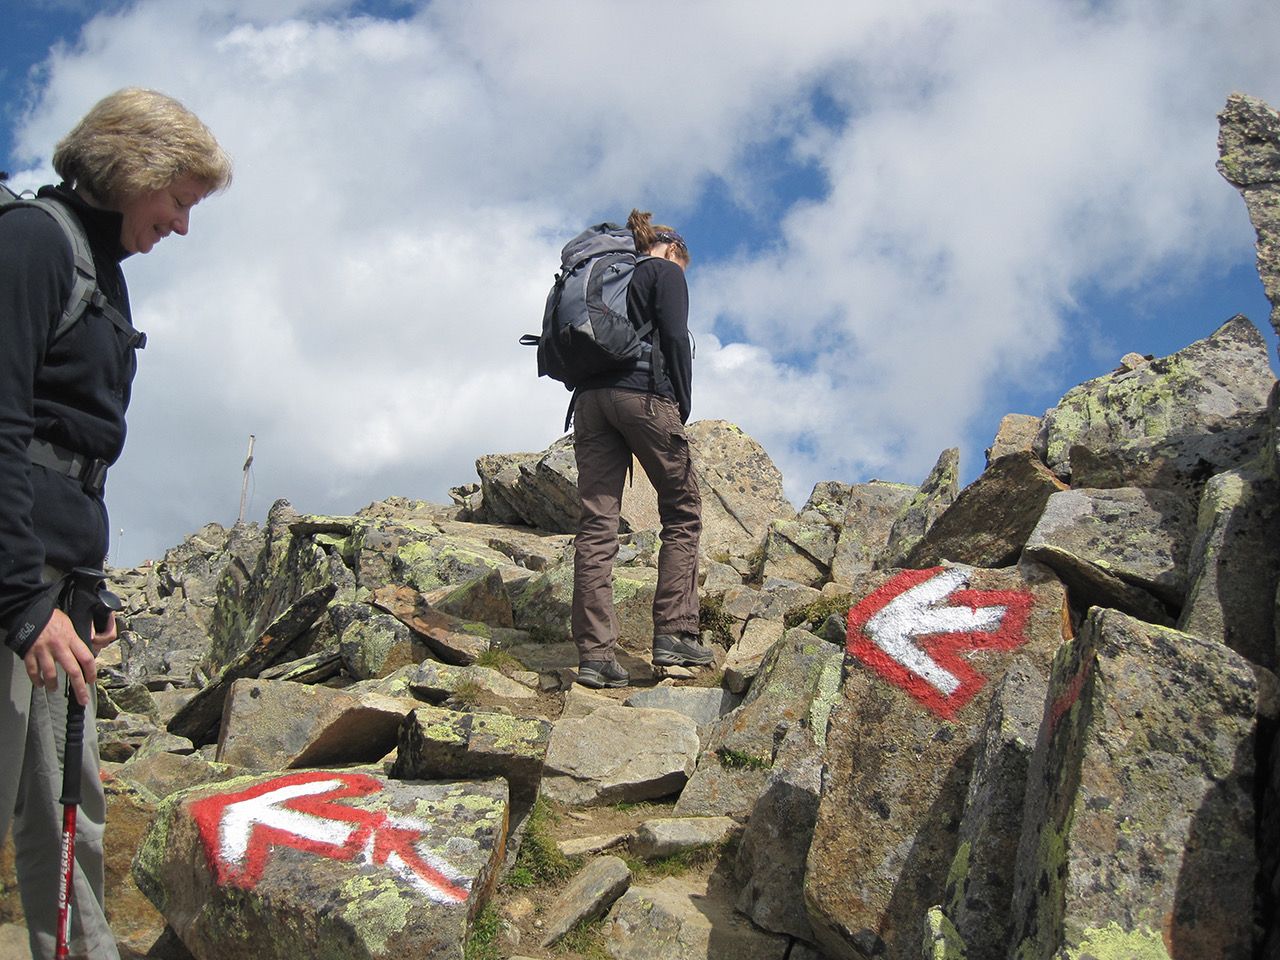 People climbing up craggy terrain, using wayfinding arrows drawn onto rocks to find the safest pathway